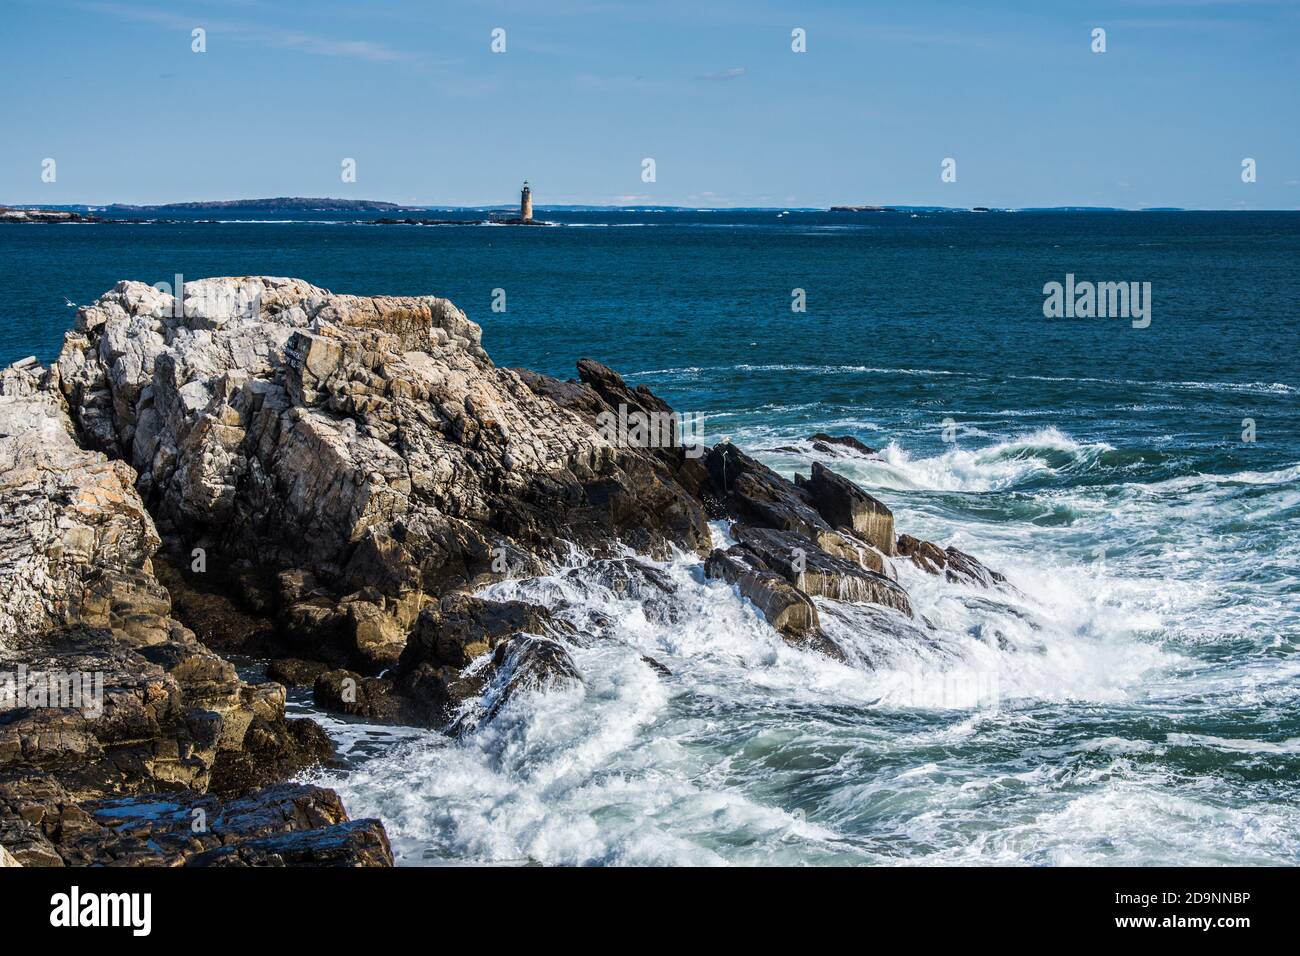 Waves surging at Portland head light, Maine. #8482 Stock Photo